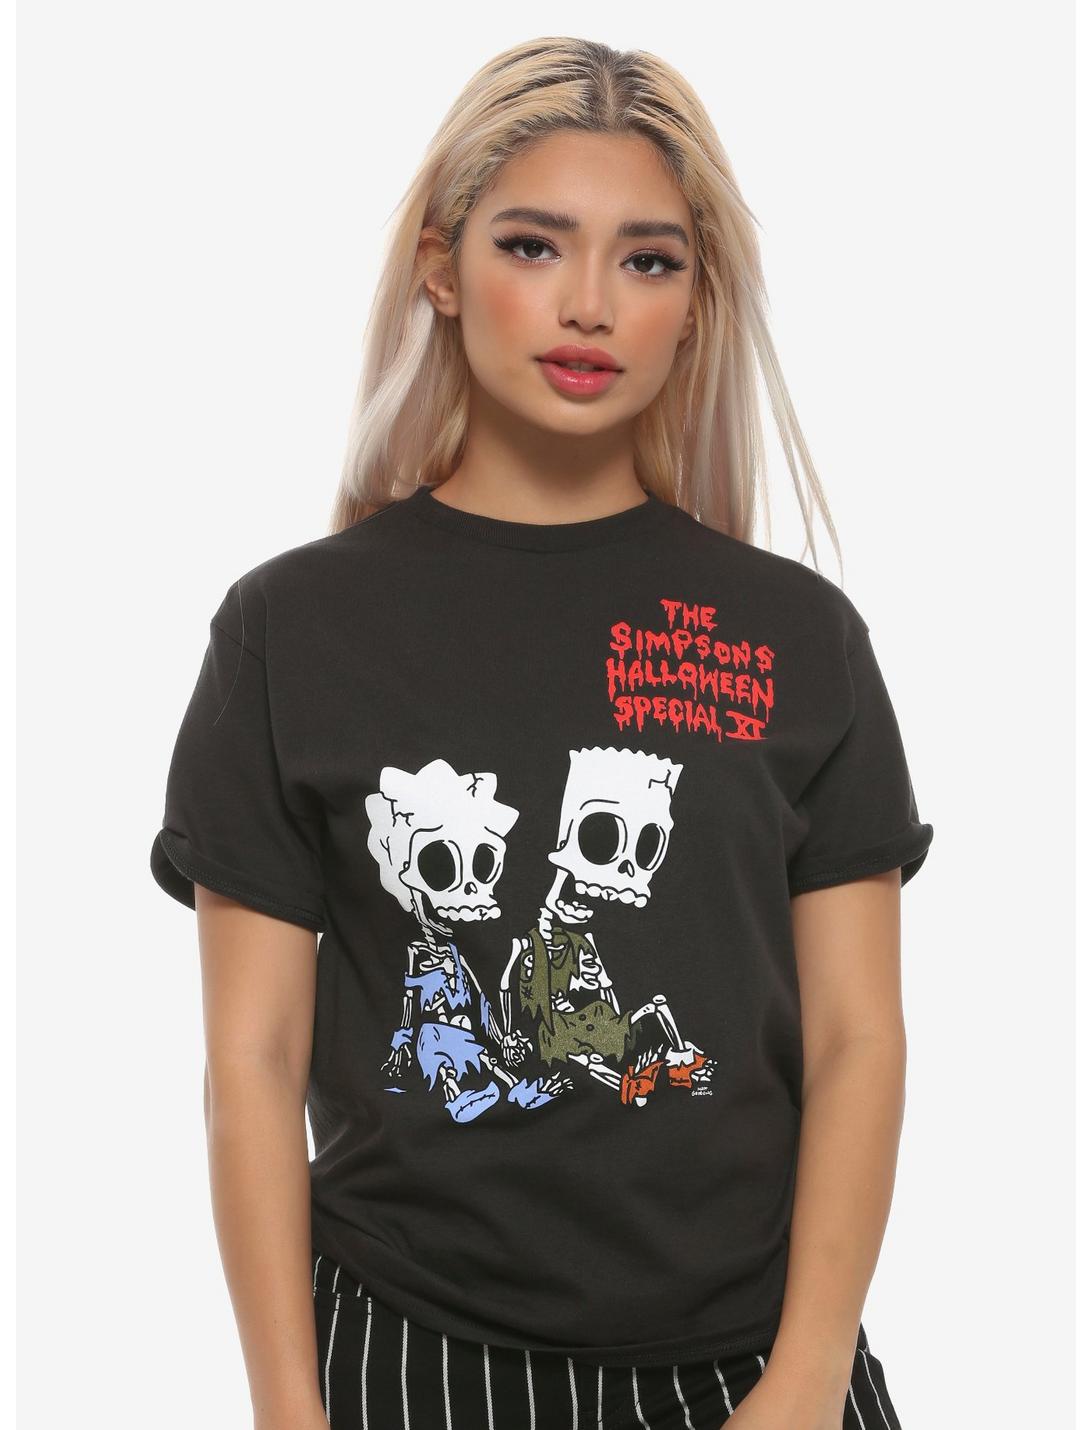 The Simpsons Halloween Special XI Girls T-Shirt, MULTI, hi-res